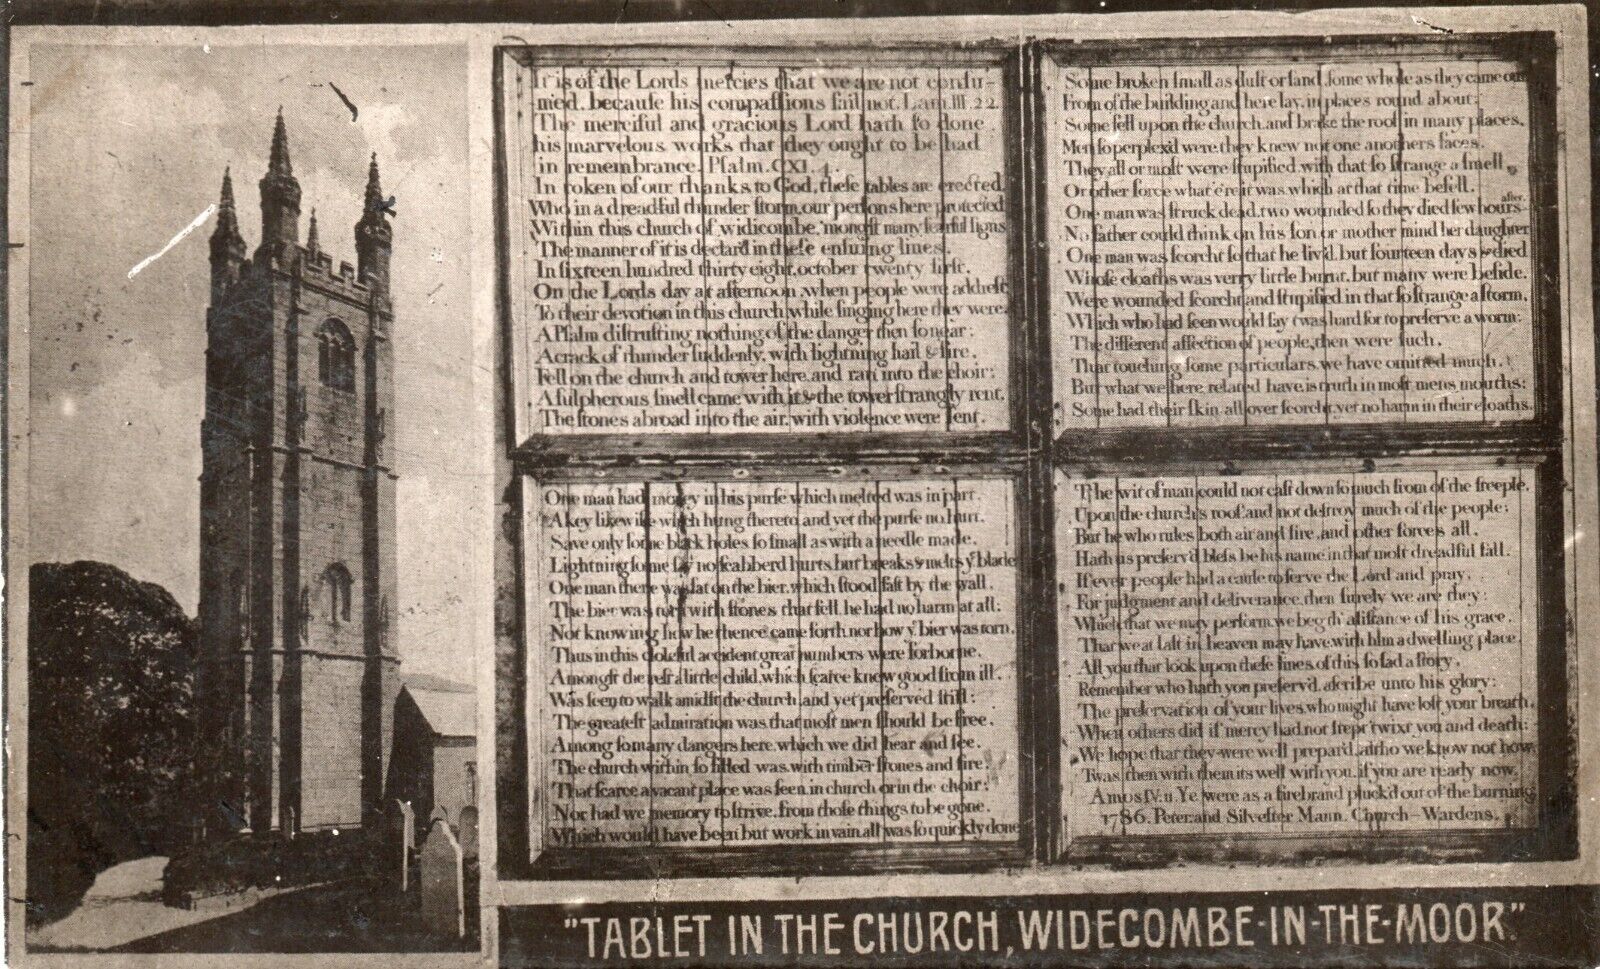 St. Pancras Church Tablet, Great Storm 1638 Widecombe-in-the-Moor, Devon England